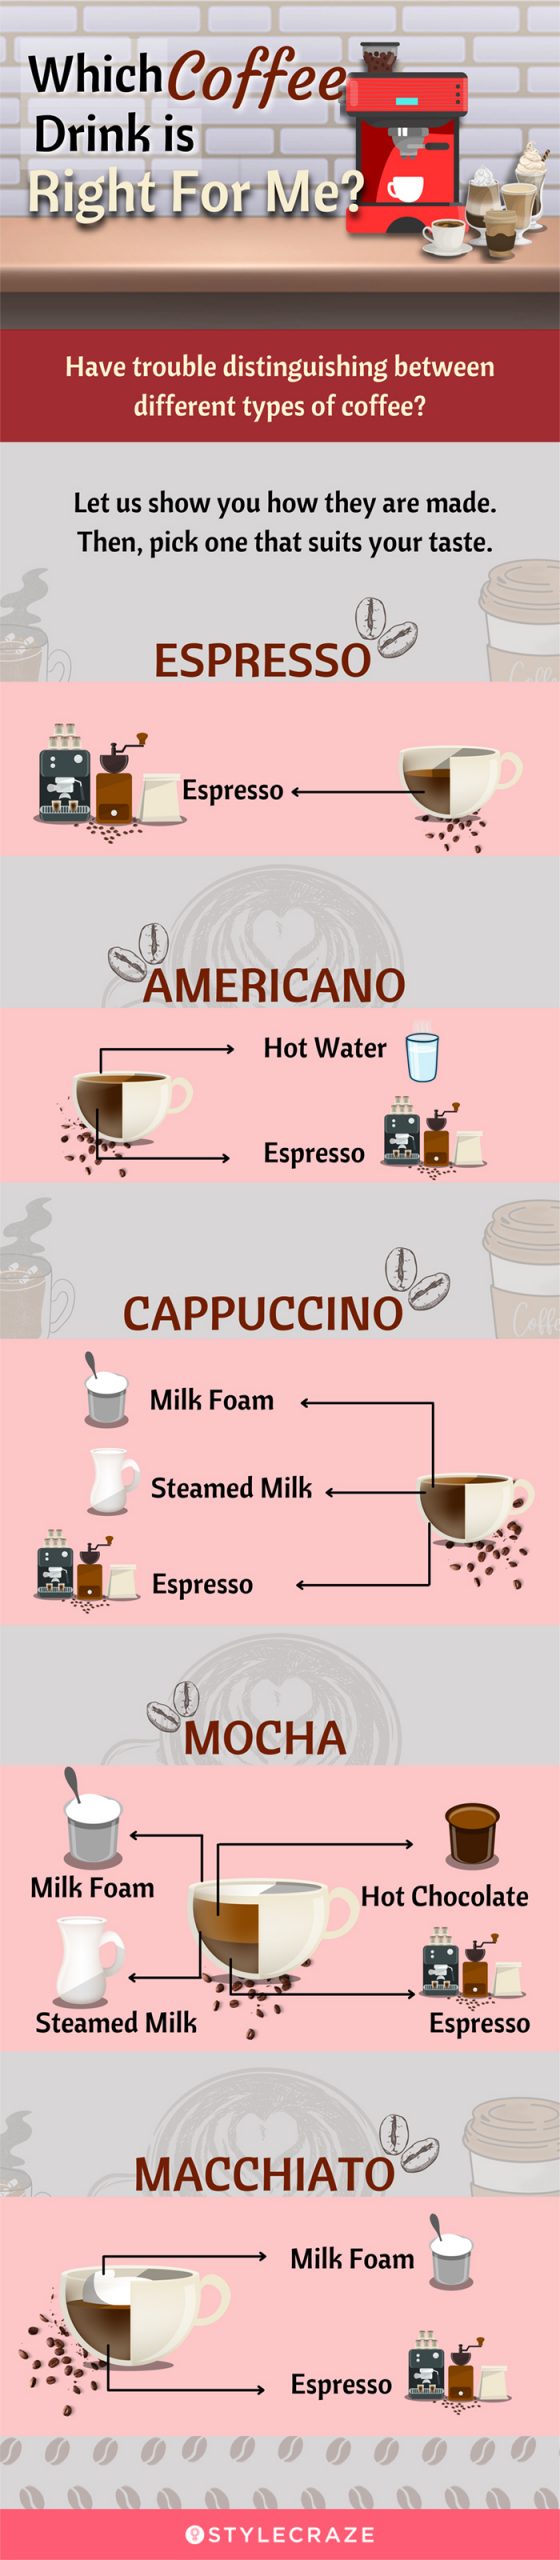 which coffee drink is right for me (infographic)